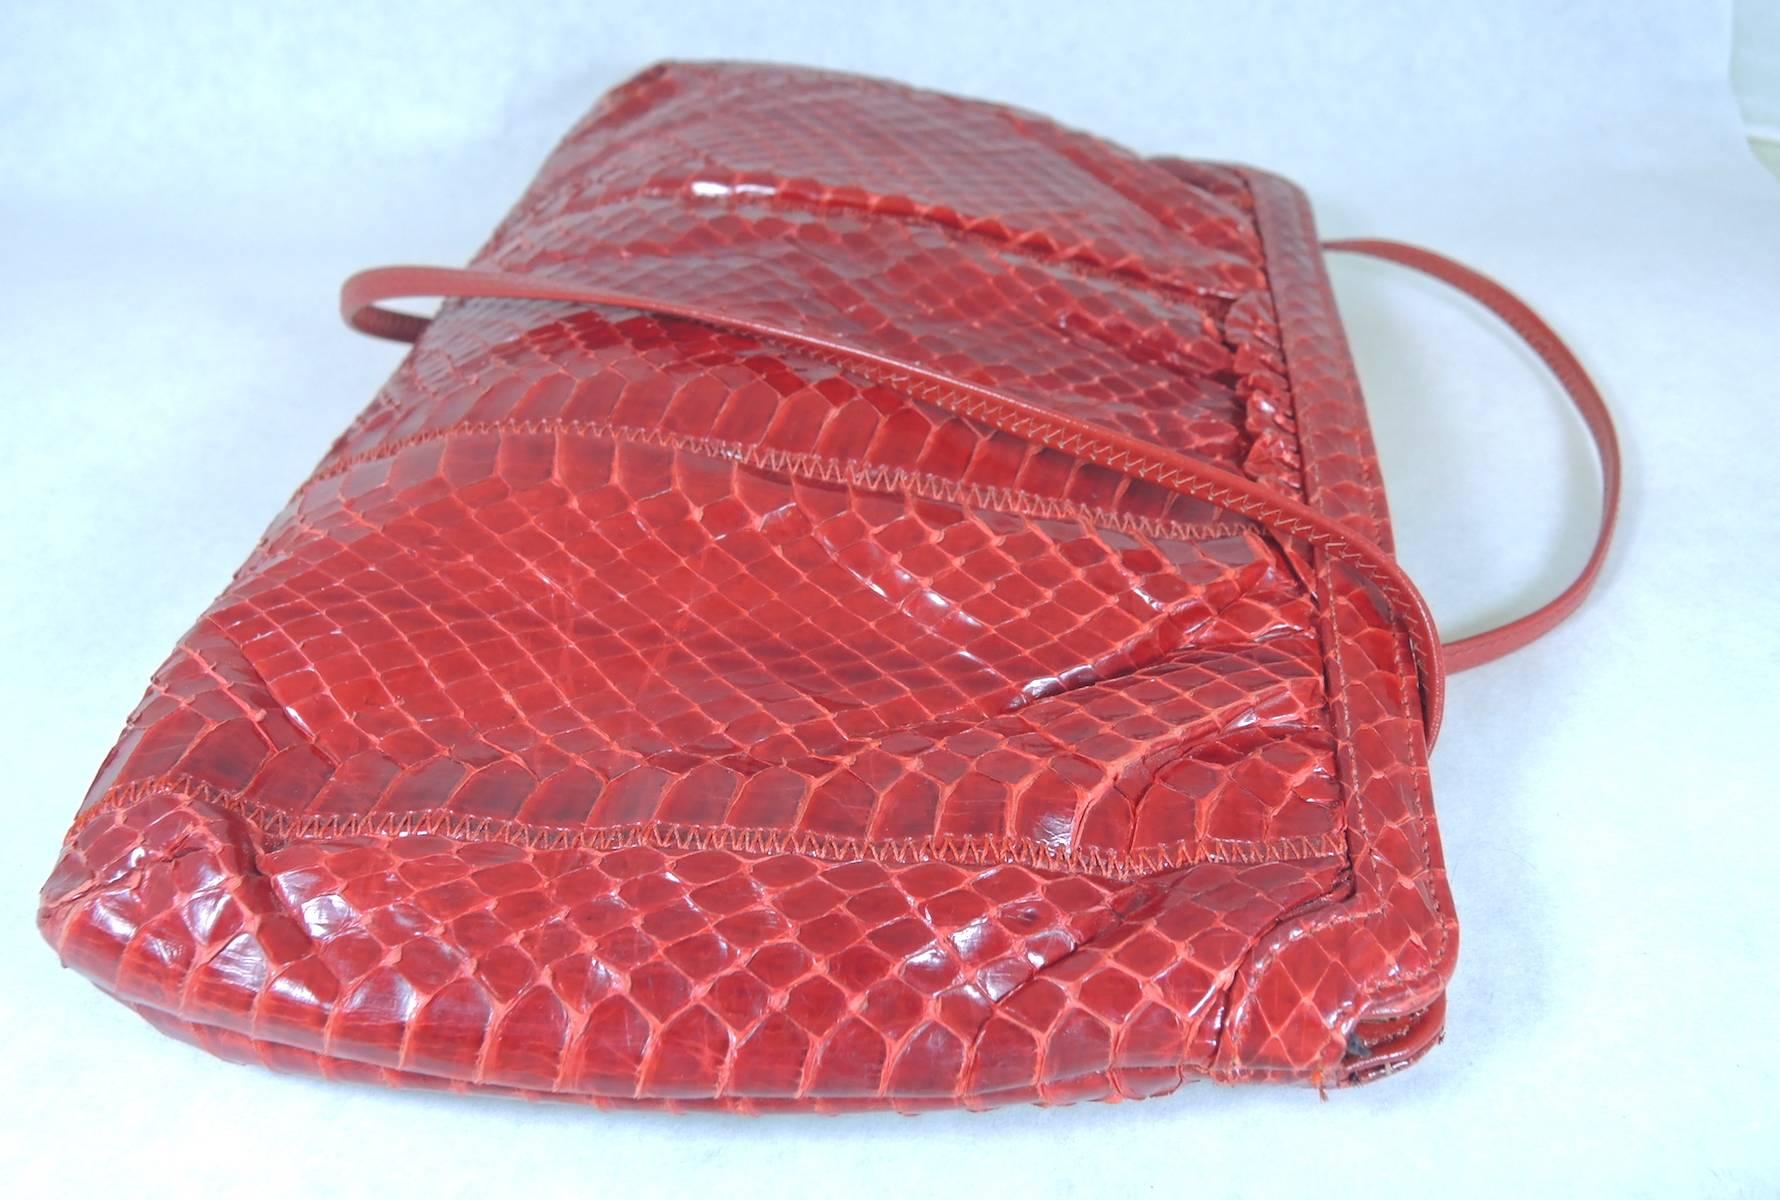 This is a beautiful vintage red shoulder bag that was designed by Palizzio. It has a deep, rich red color in perfect snakeskin leather. It has a metal band that snaps to open and close and has a fabric lining. This bag measures 7” x 10”. The strap